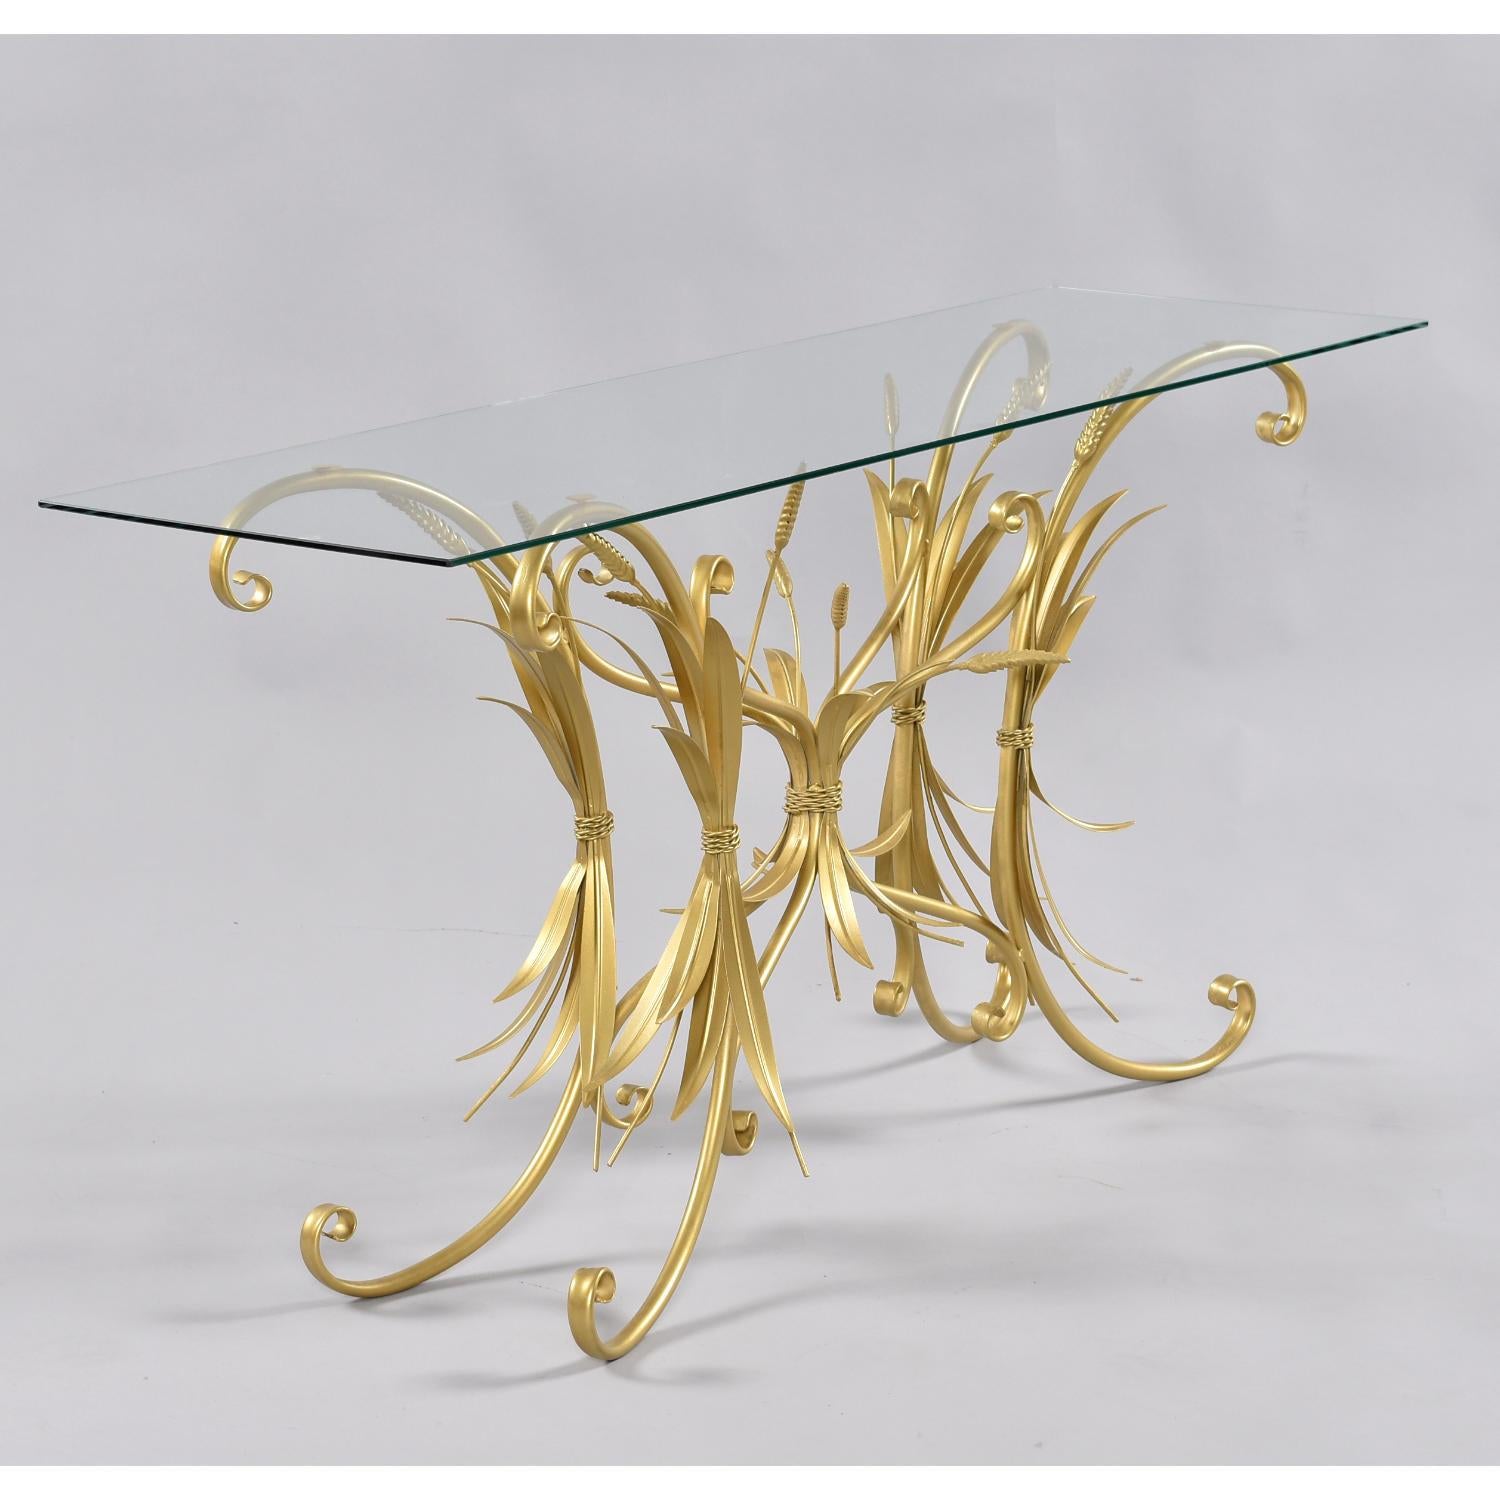 Freshly restored vintage tole wheat sheaf sofa table. The piece is likely Italian with signature maximalist flare. The whimsical piece is quite dynamic with scrolls, roping, and sprouting bundles of wheat. The narrow form is ideal for placement